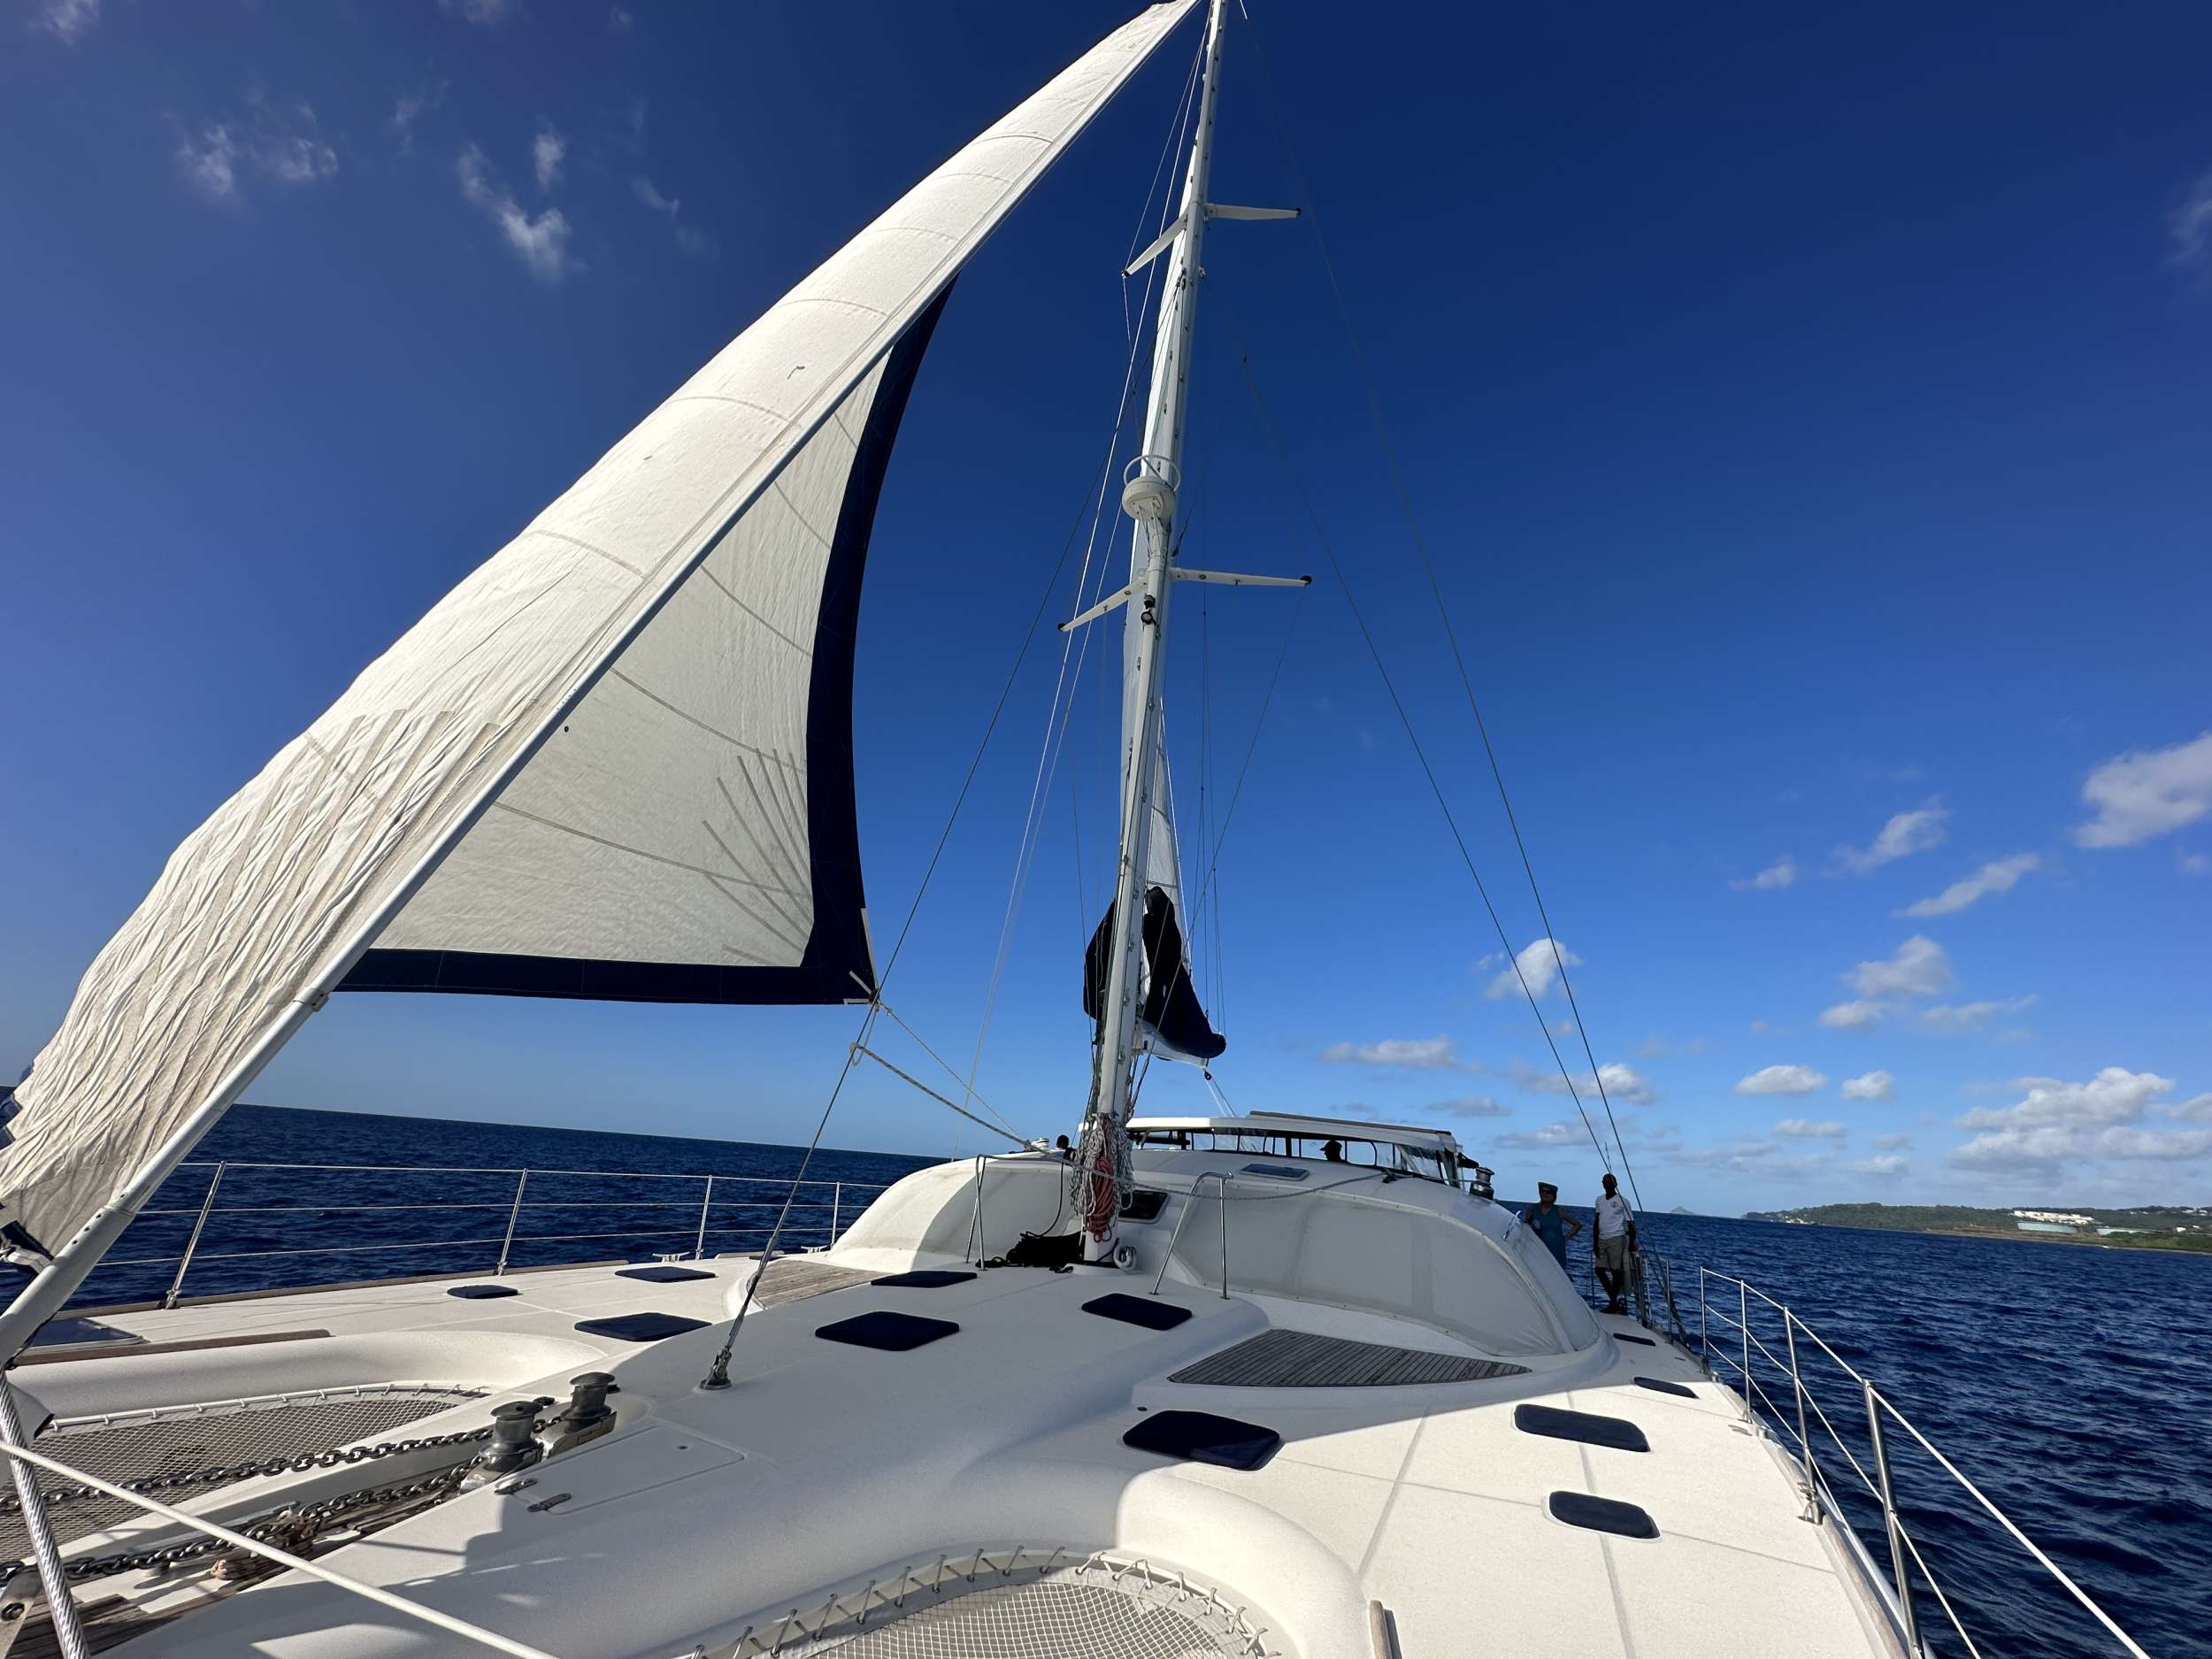 Lady Marigot - Yacht Charter Antigua and Barbuda & Boat hire in Caribbean 1